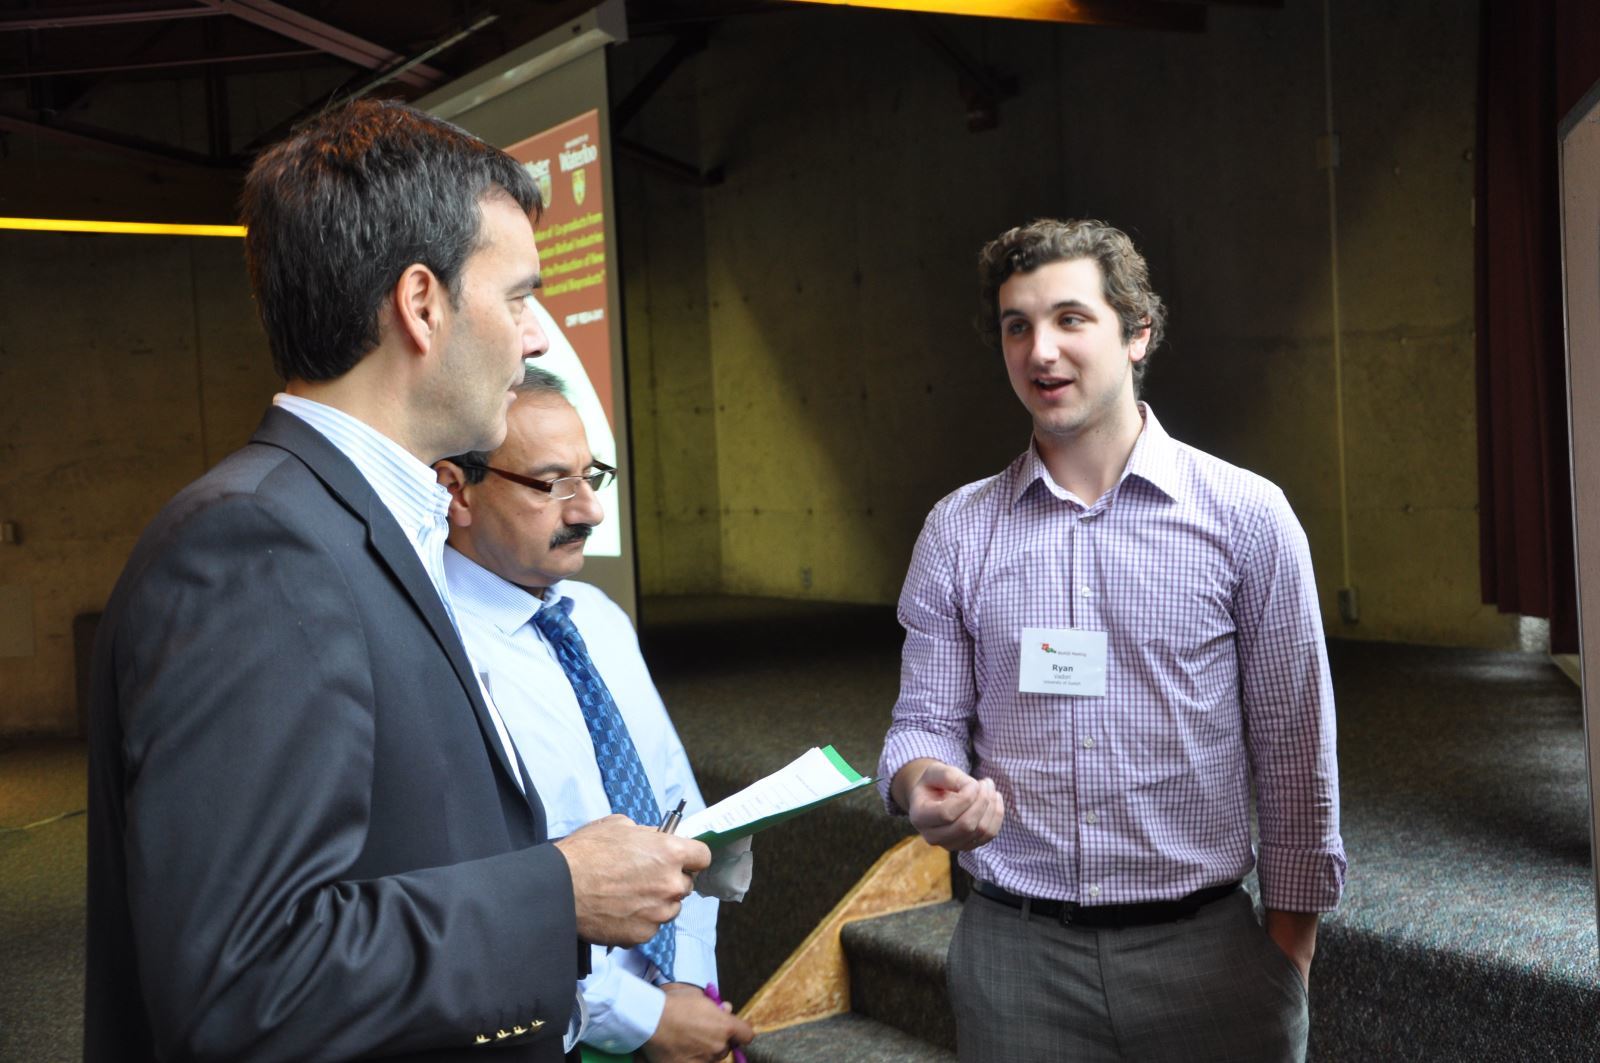 Three BDDC researchers having a discussion at the 2nd Annual BioNIB meeting